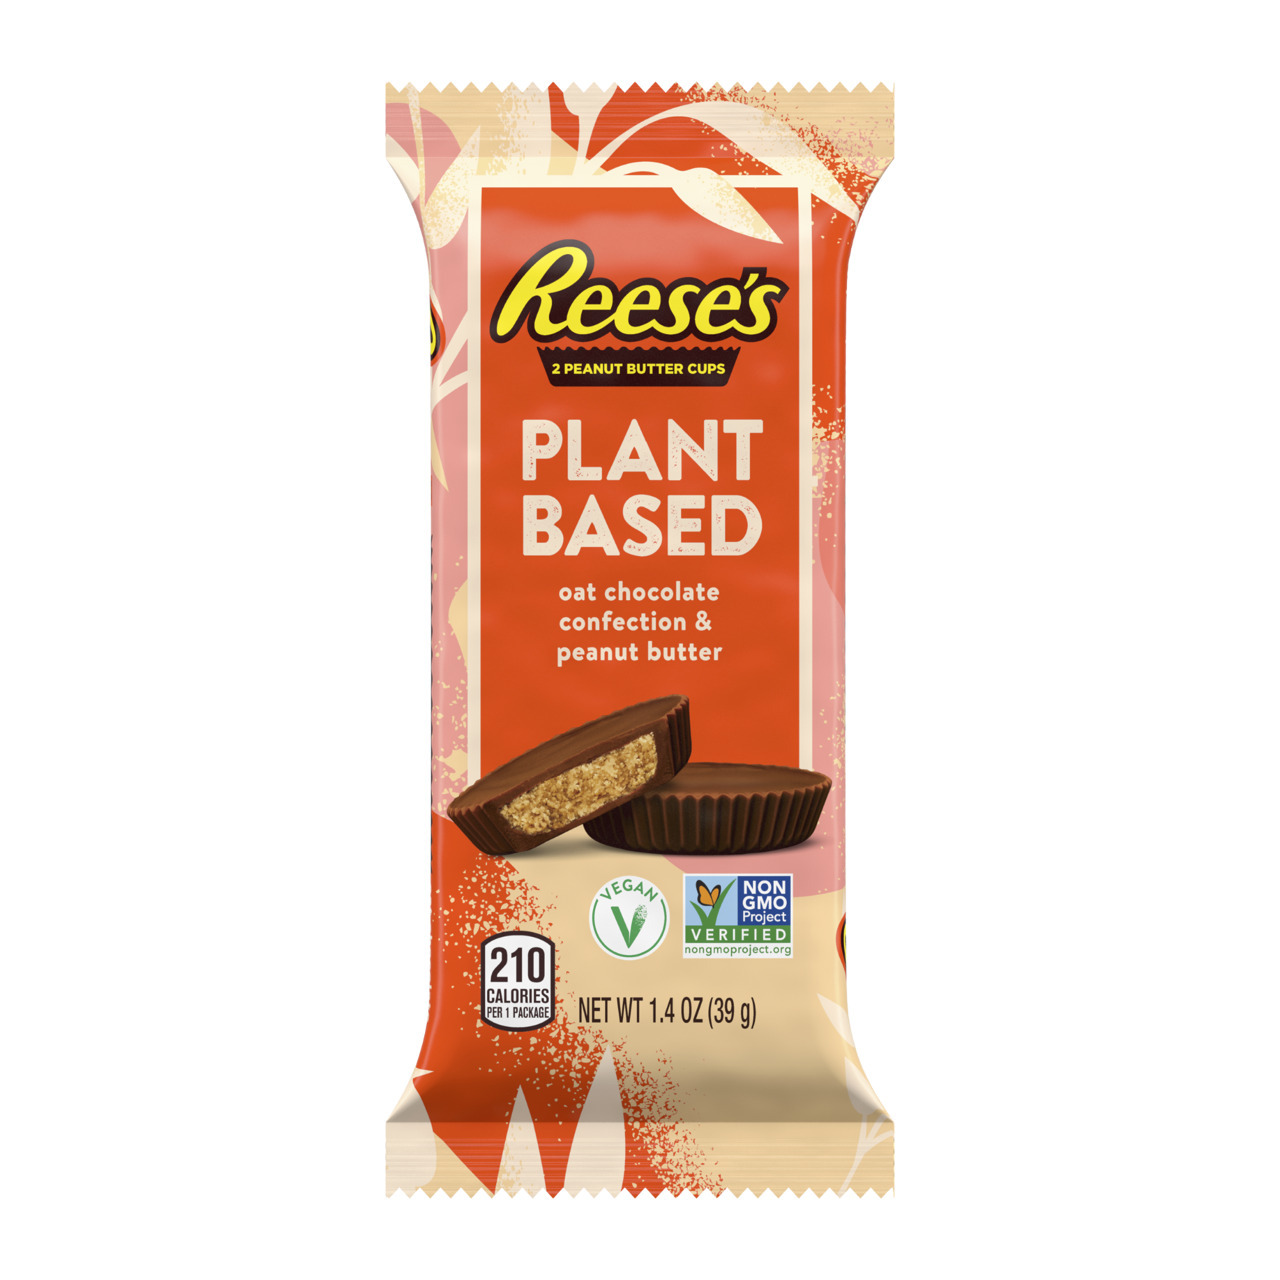 The Hersey Company's new plant-based Reese's peanut butter cups. (The Hershey Company via AP)